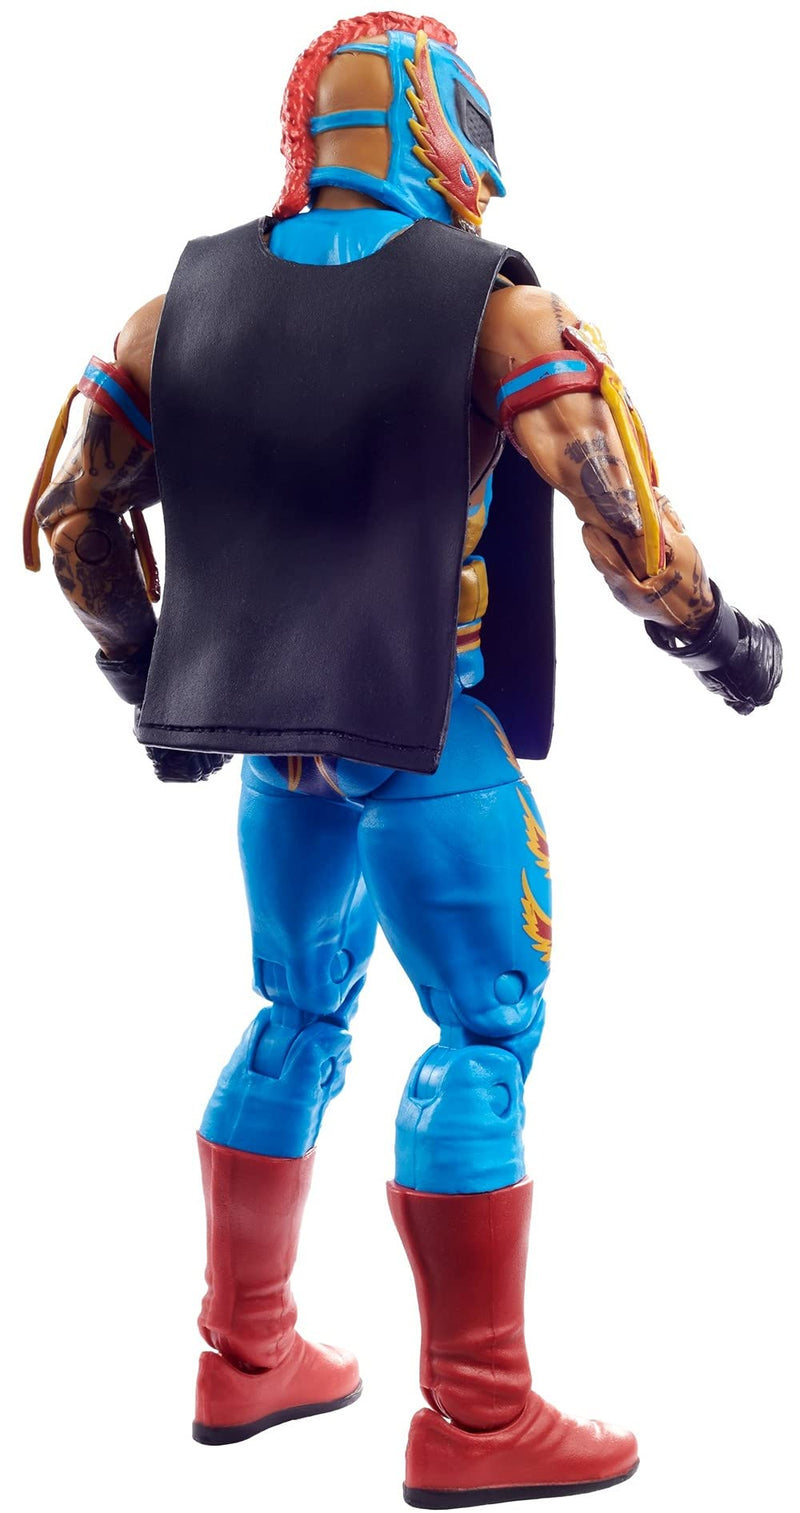 WWE Rey Mysterio Elite Collection Series 89 Action Figure 6 in Posable Collectible Gift